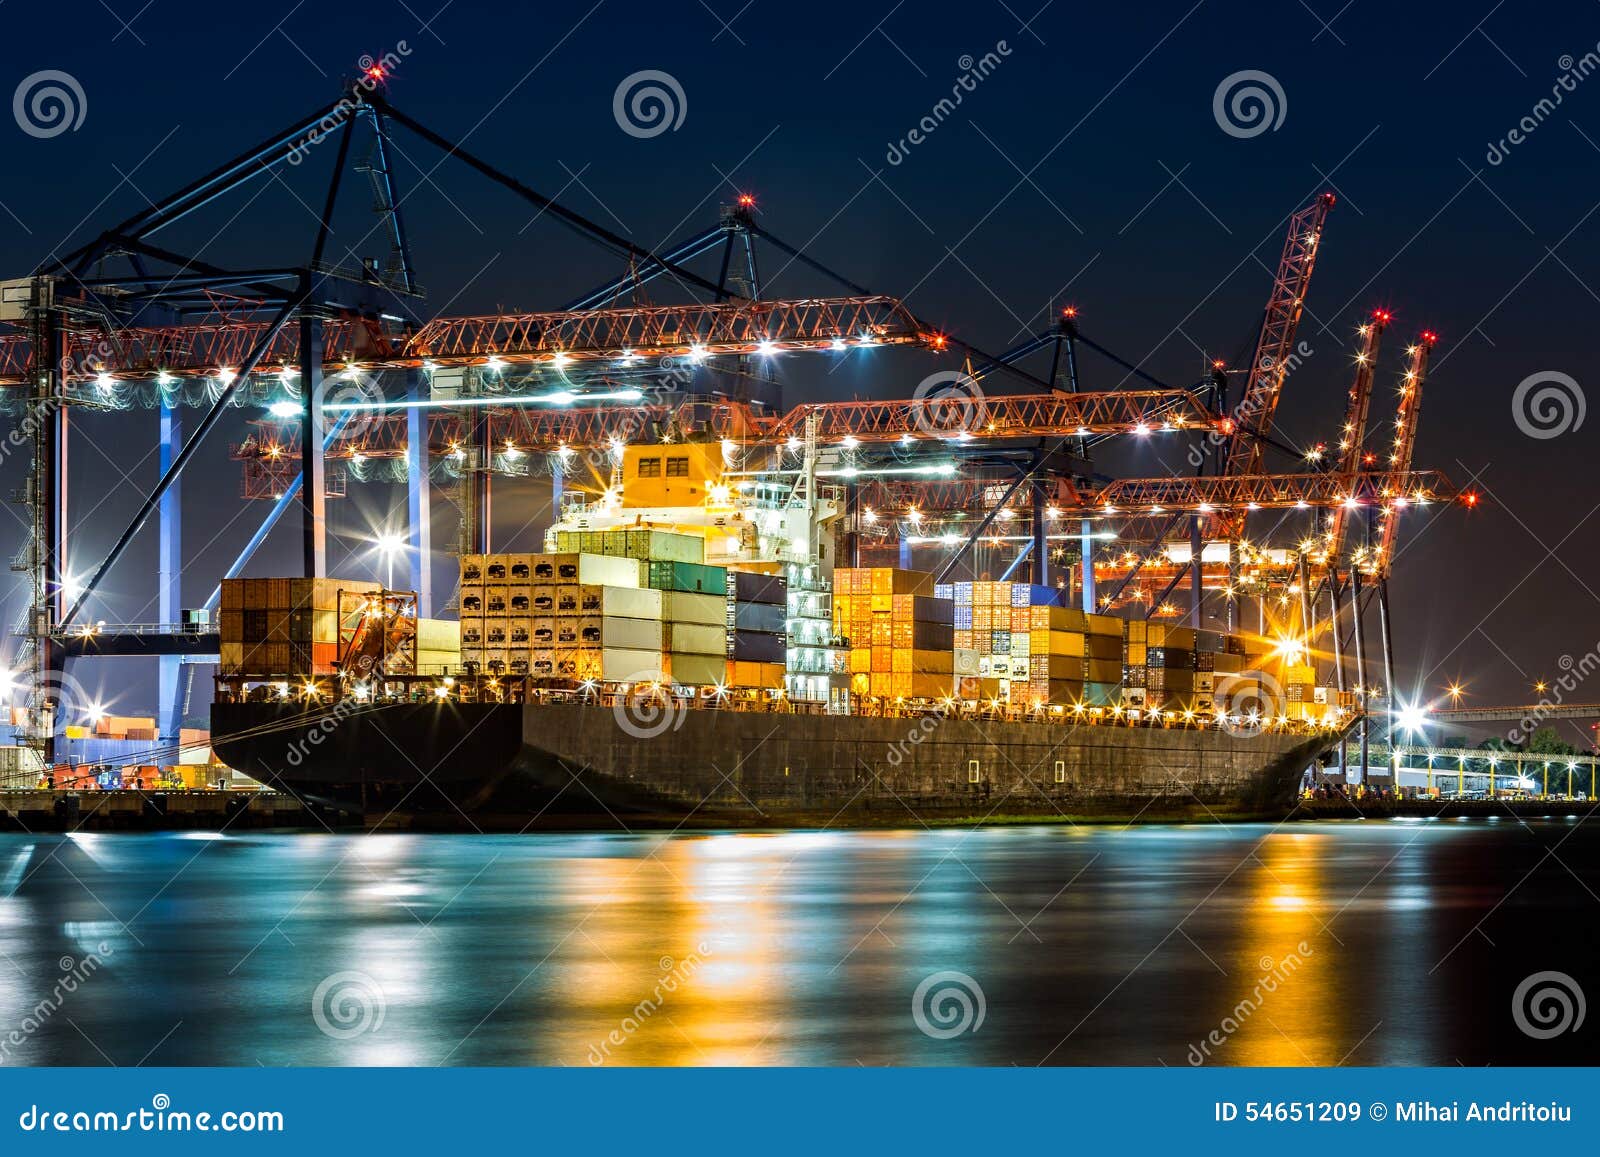 ship loaded in new york container terminal